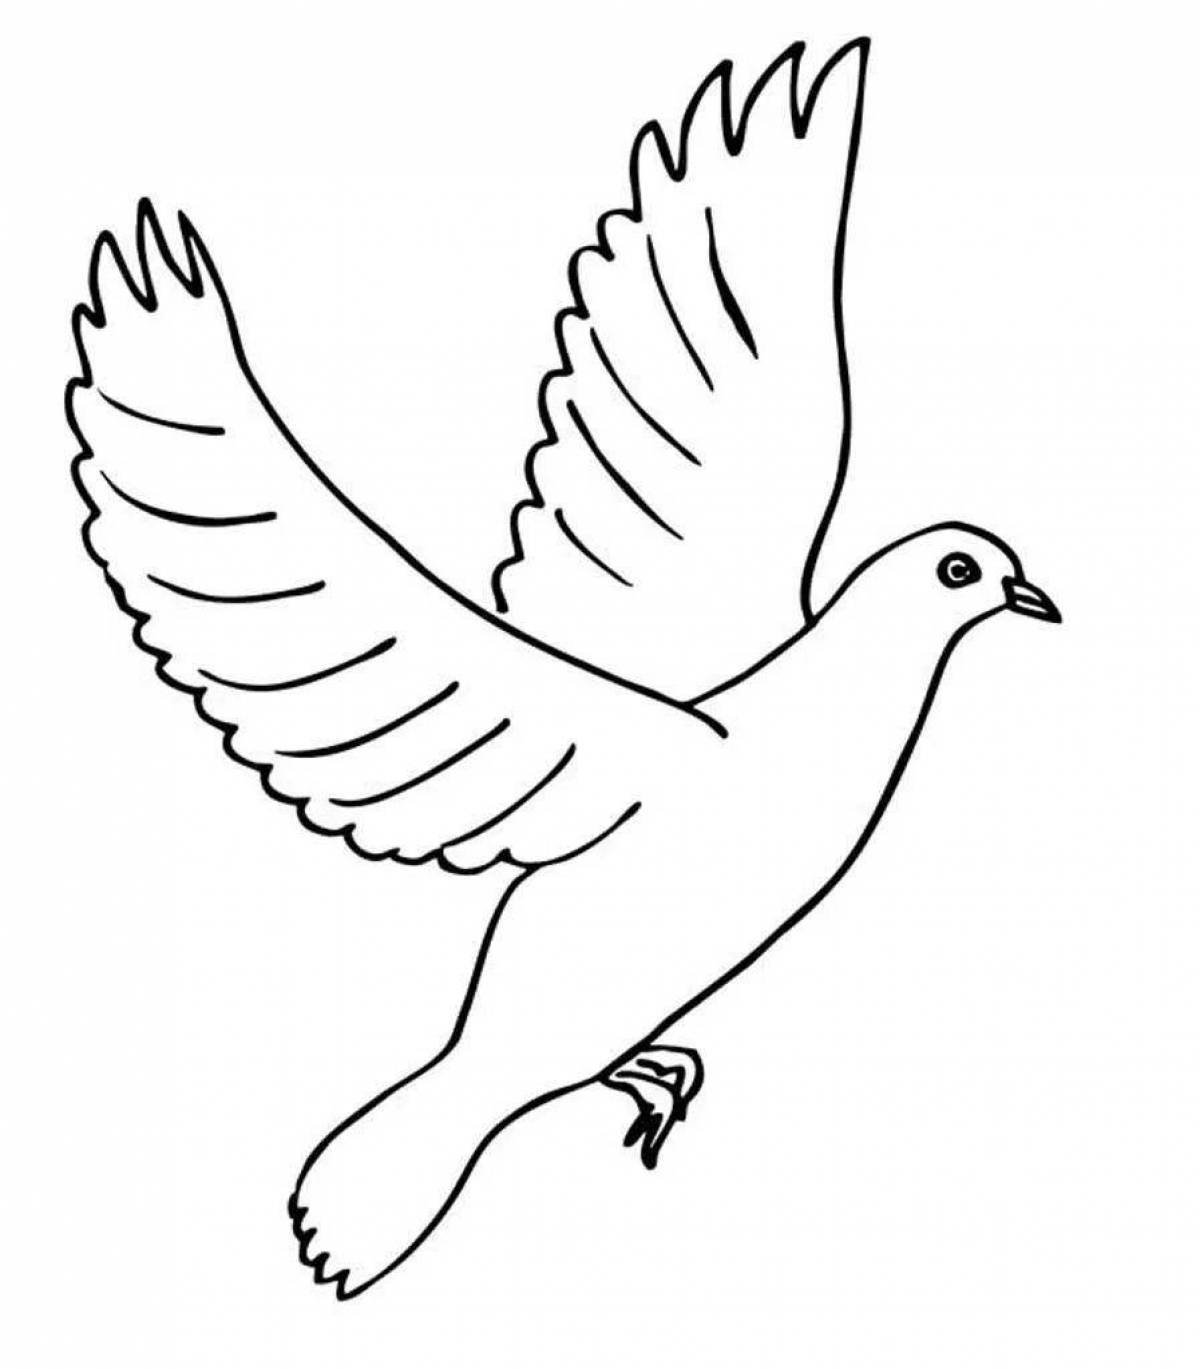 Violent flying bird coloring page